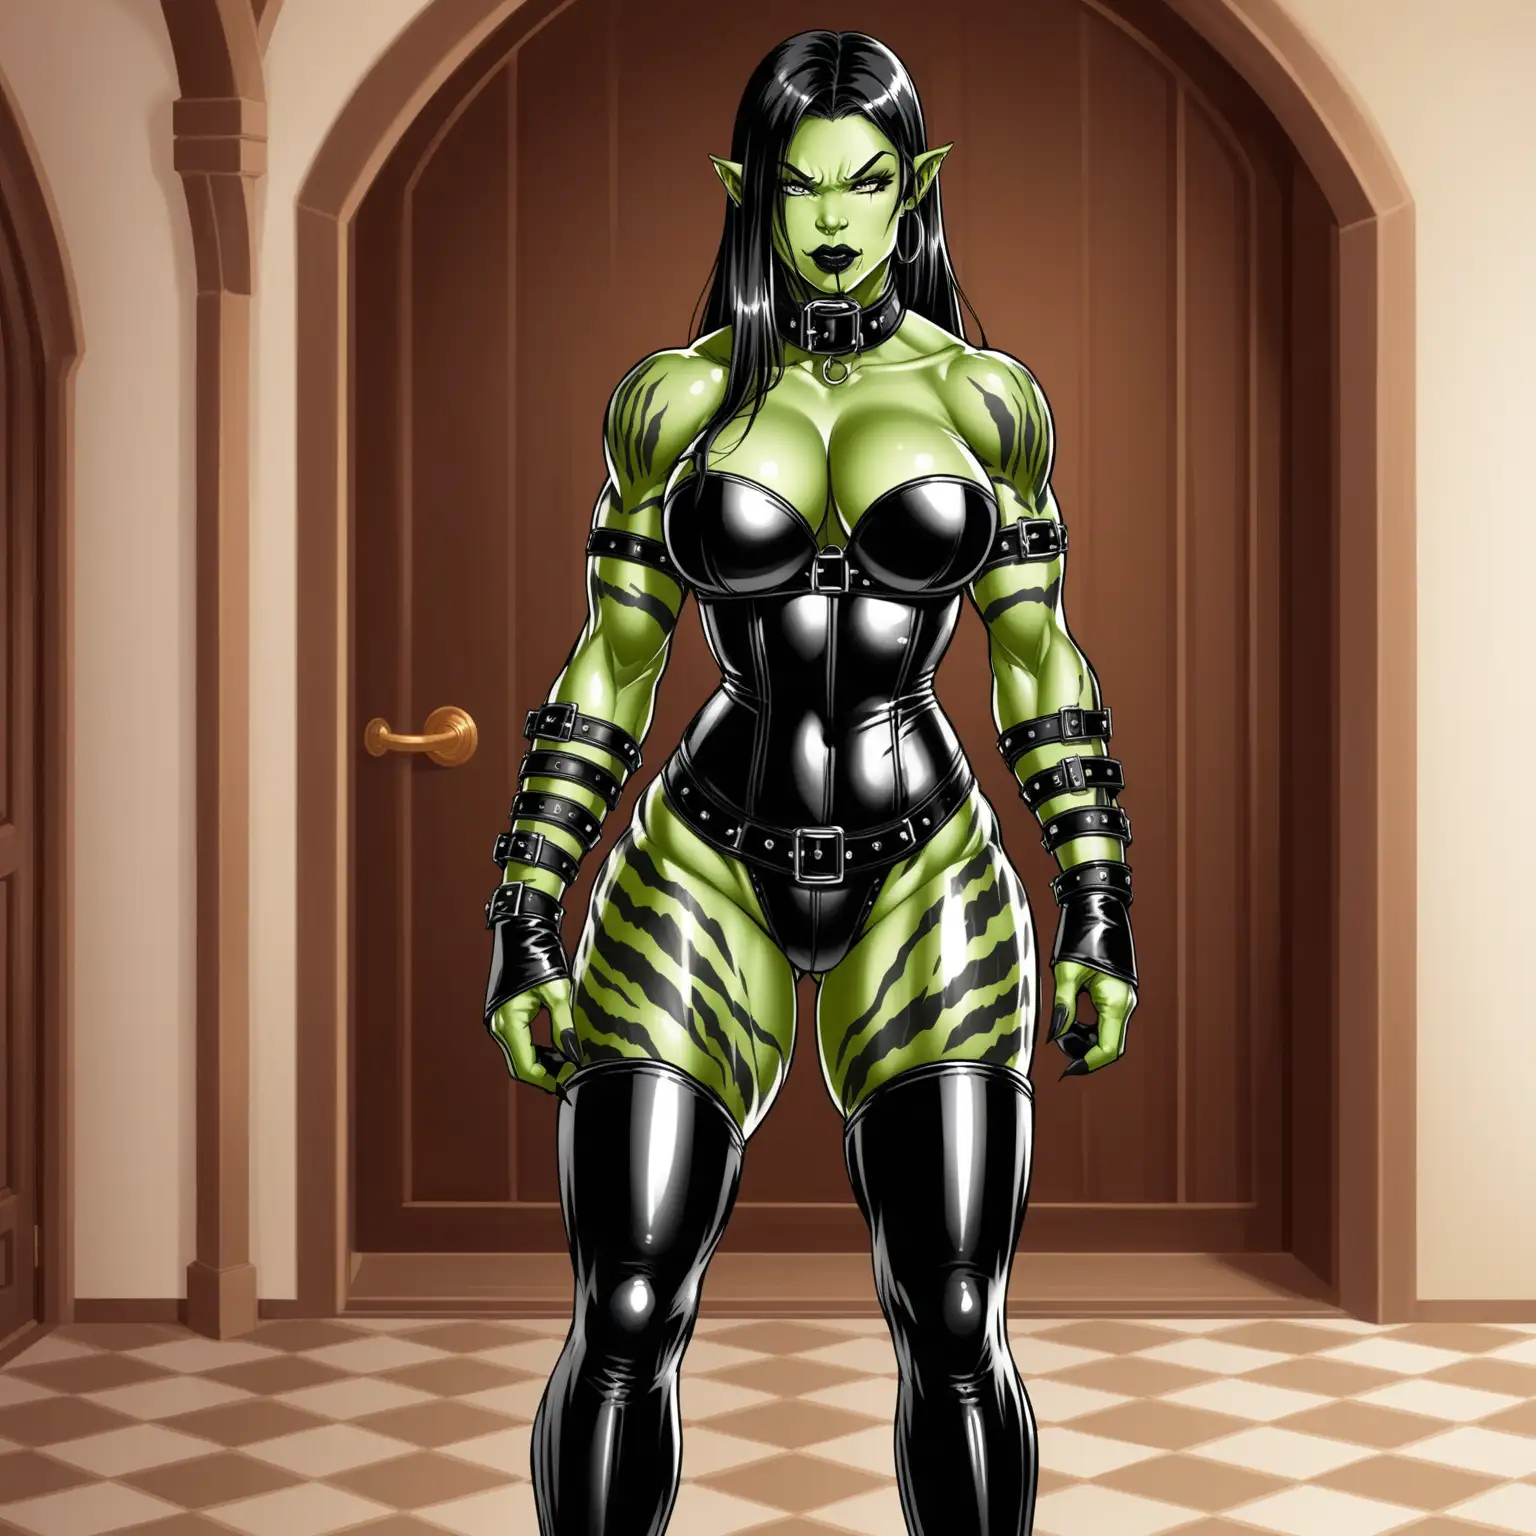 The Orc woman has green skin, long straight black hair that is shaved on the left side, orc tusks, gray eyes, big tits, she is tall, very muscular and very beautiful and 40 years old. She black tiger stripe tattoos on her body. She has shiny black lipstick. She is wearing a shiny black latex corset, miniskirt, very long gloves, high heel thigh high boots, bdsm gear and a bondage posture collar with a ring. She is in a mansion. She is relaxed and does not have a weapon.